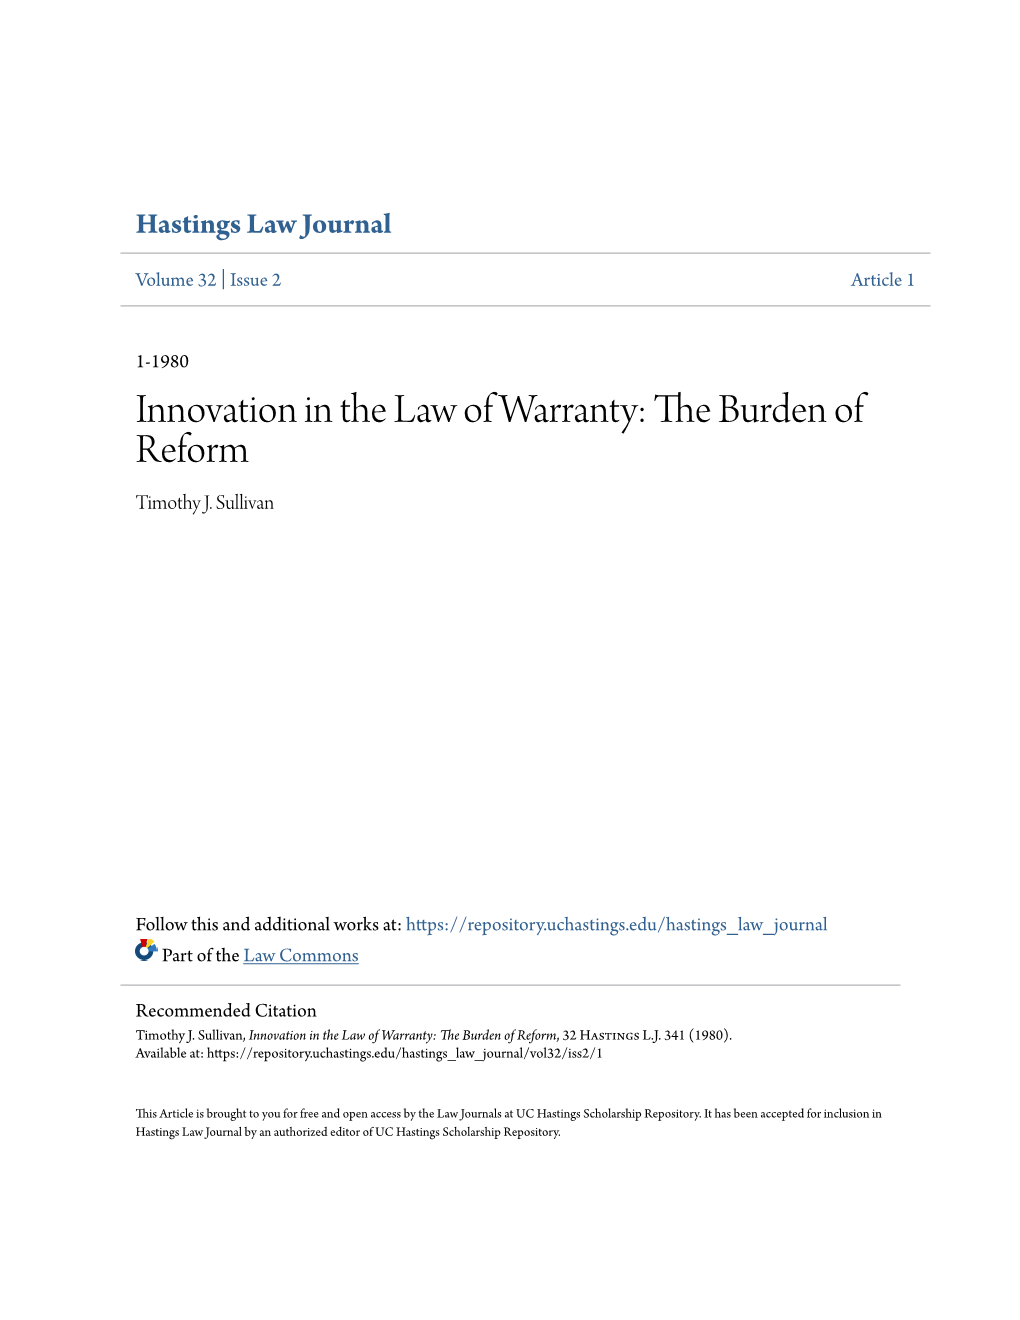 Innovation in the Law of Warranty: the Urb Den of Reform Timothy J